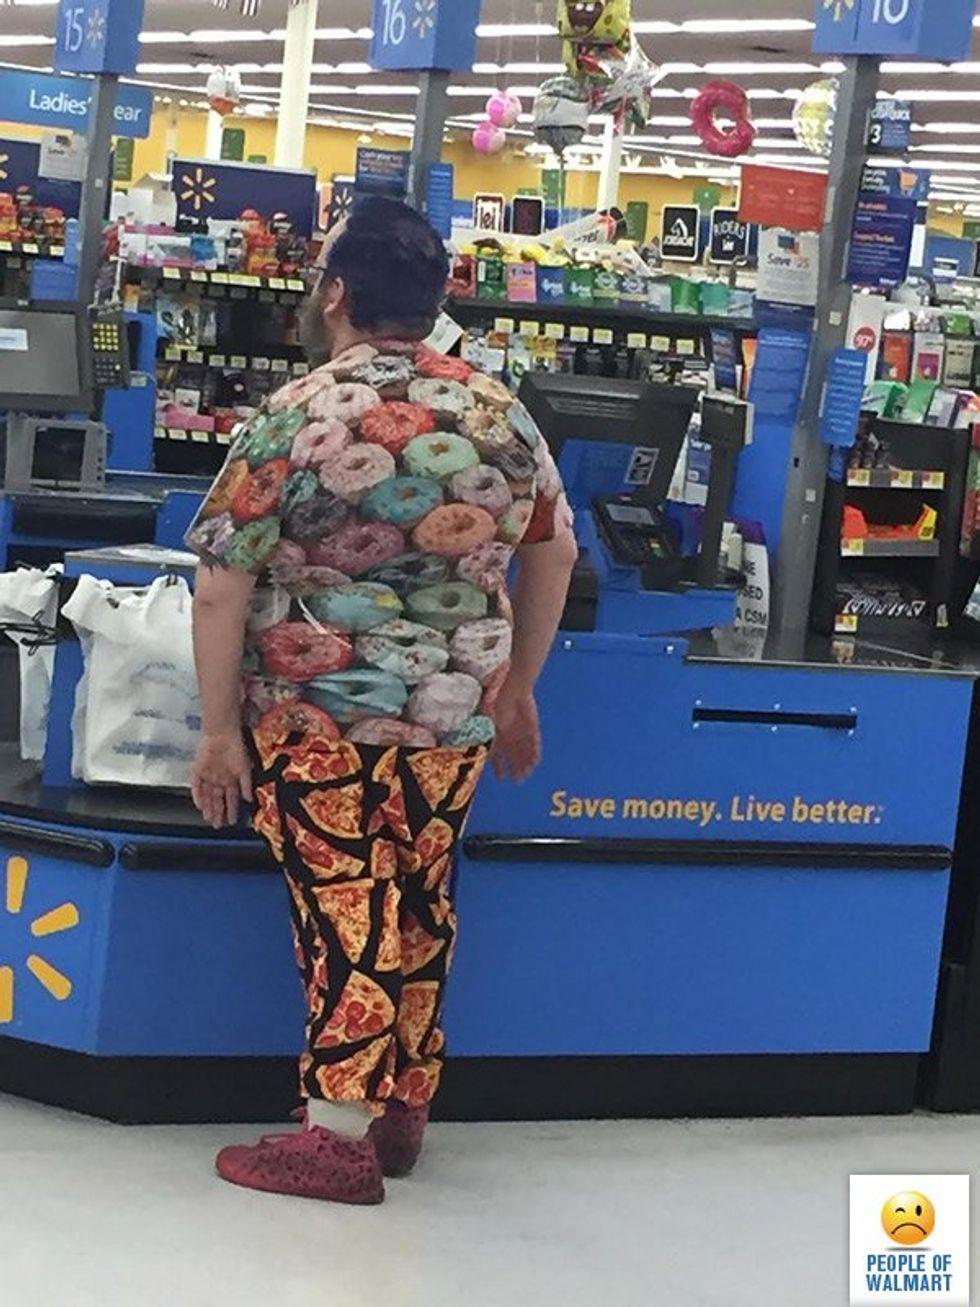 35 Photos That Prove Walmart Is One of the Strangest Places On the